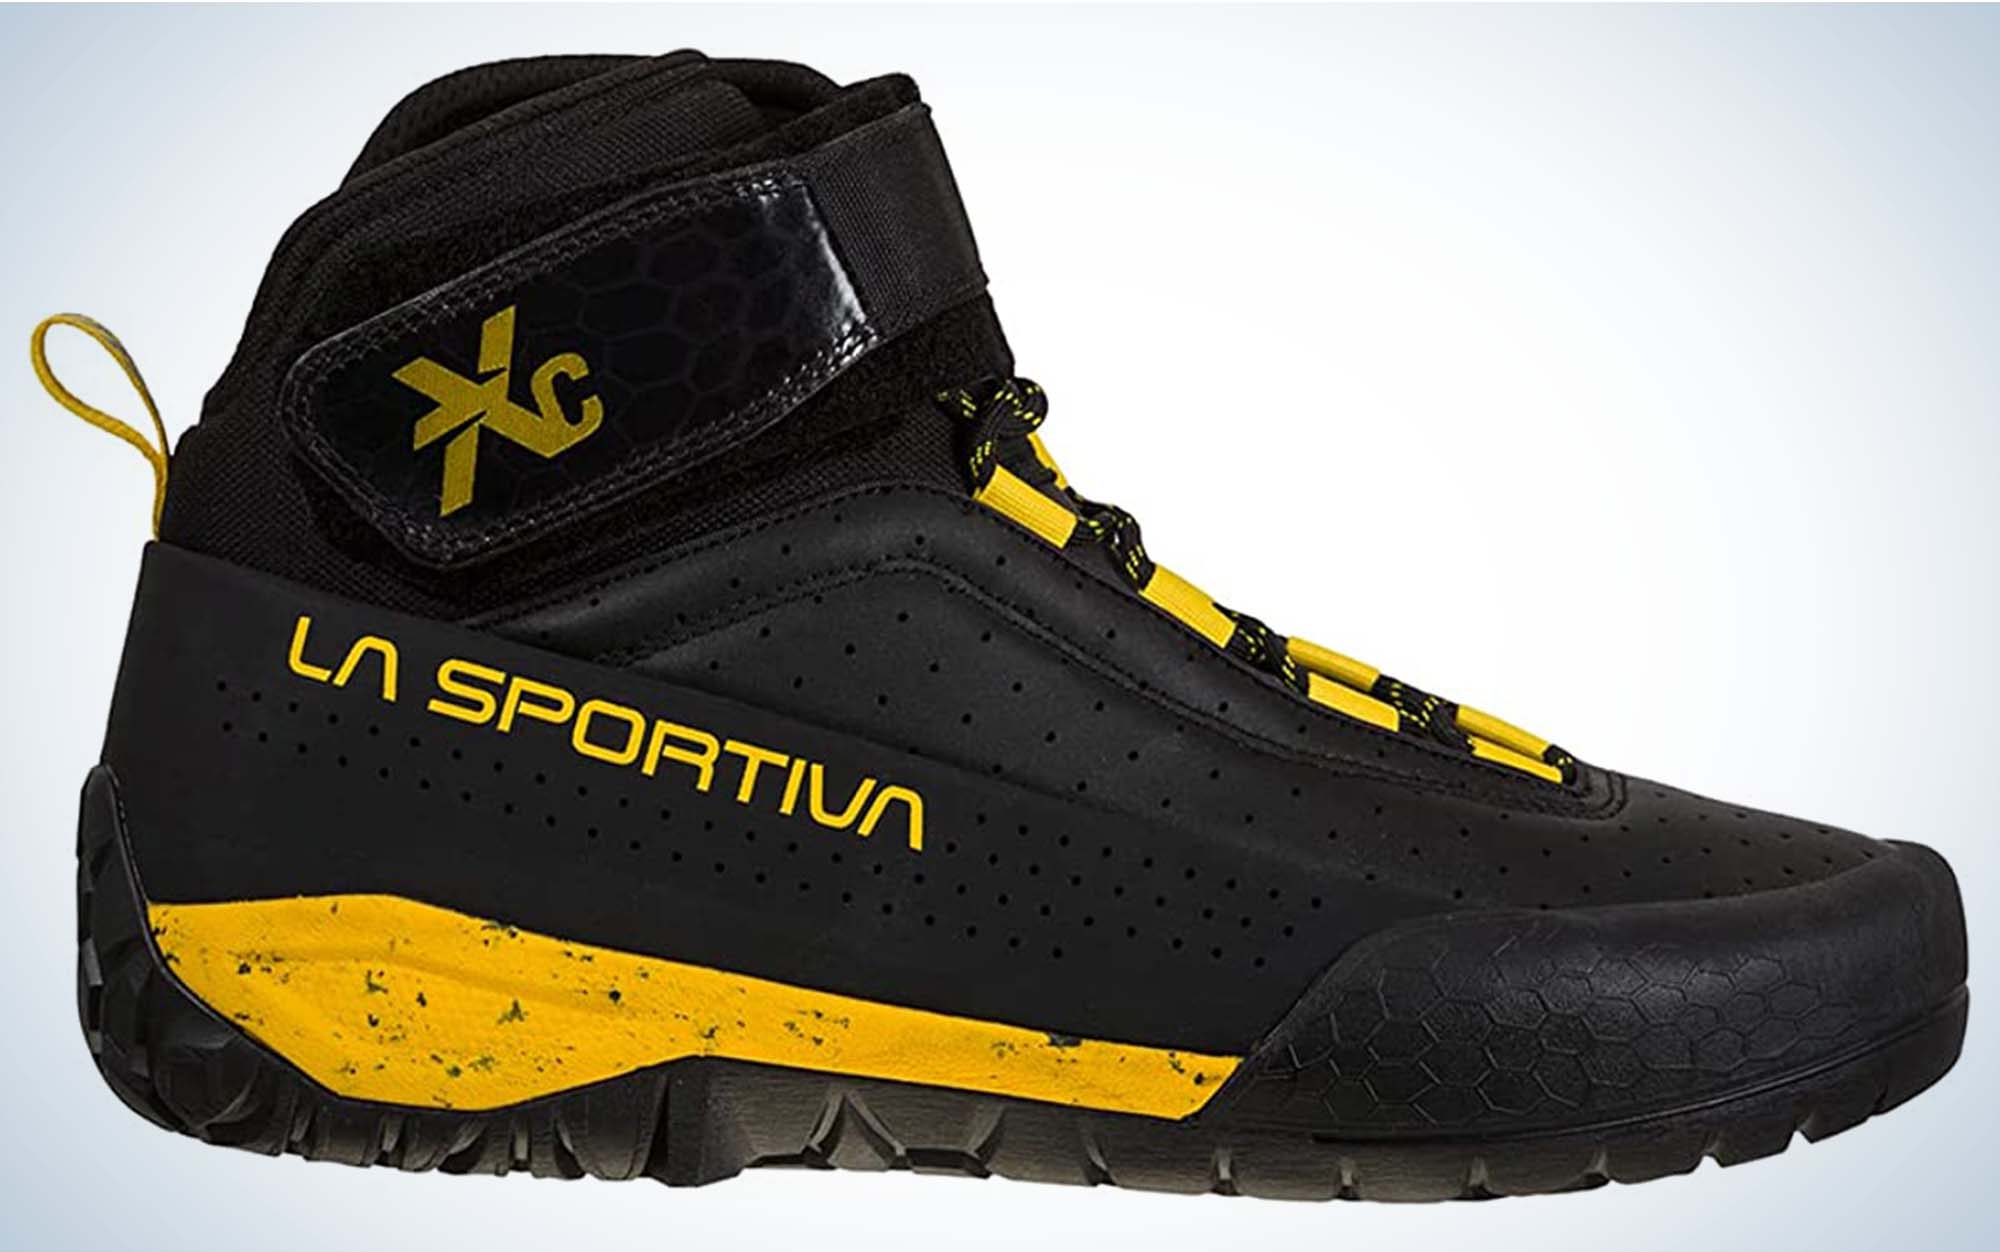 The La Sportiva TX Canyon is the most protective water shoe for hiking.